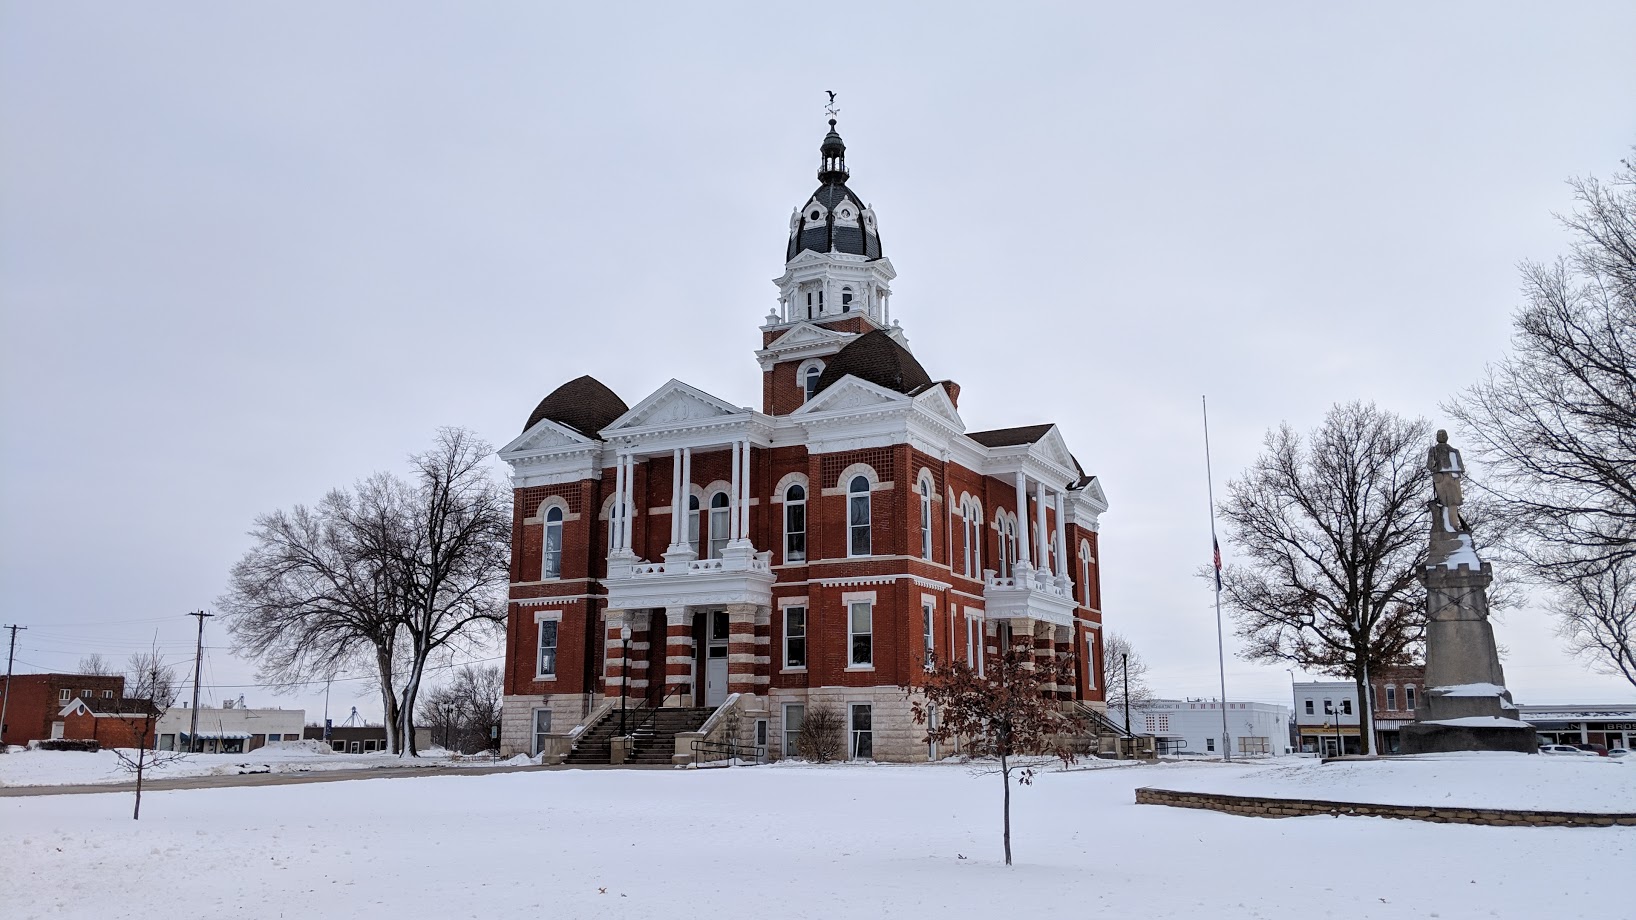 Courthouse Winter